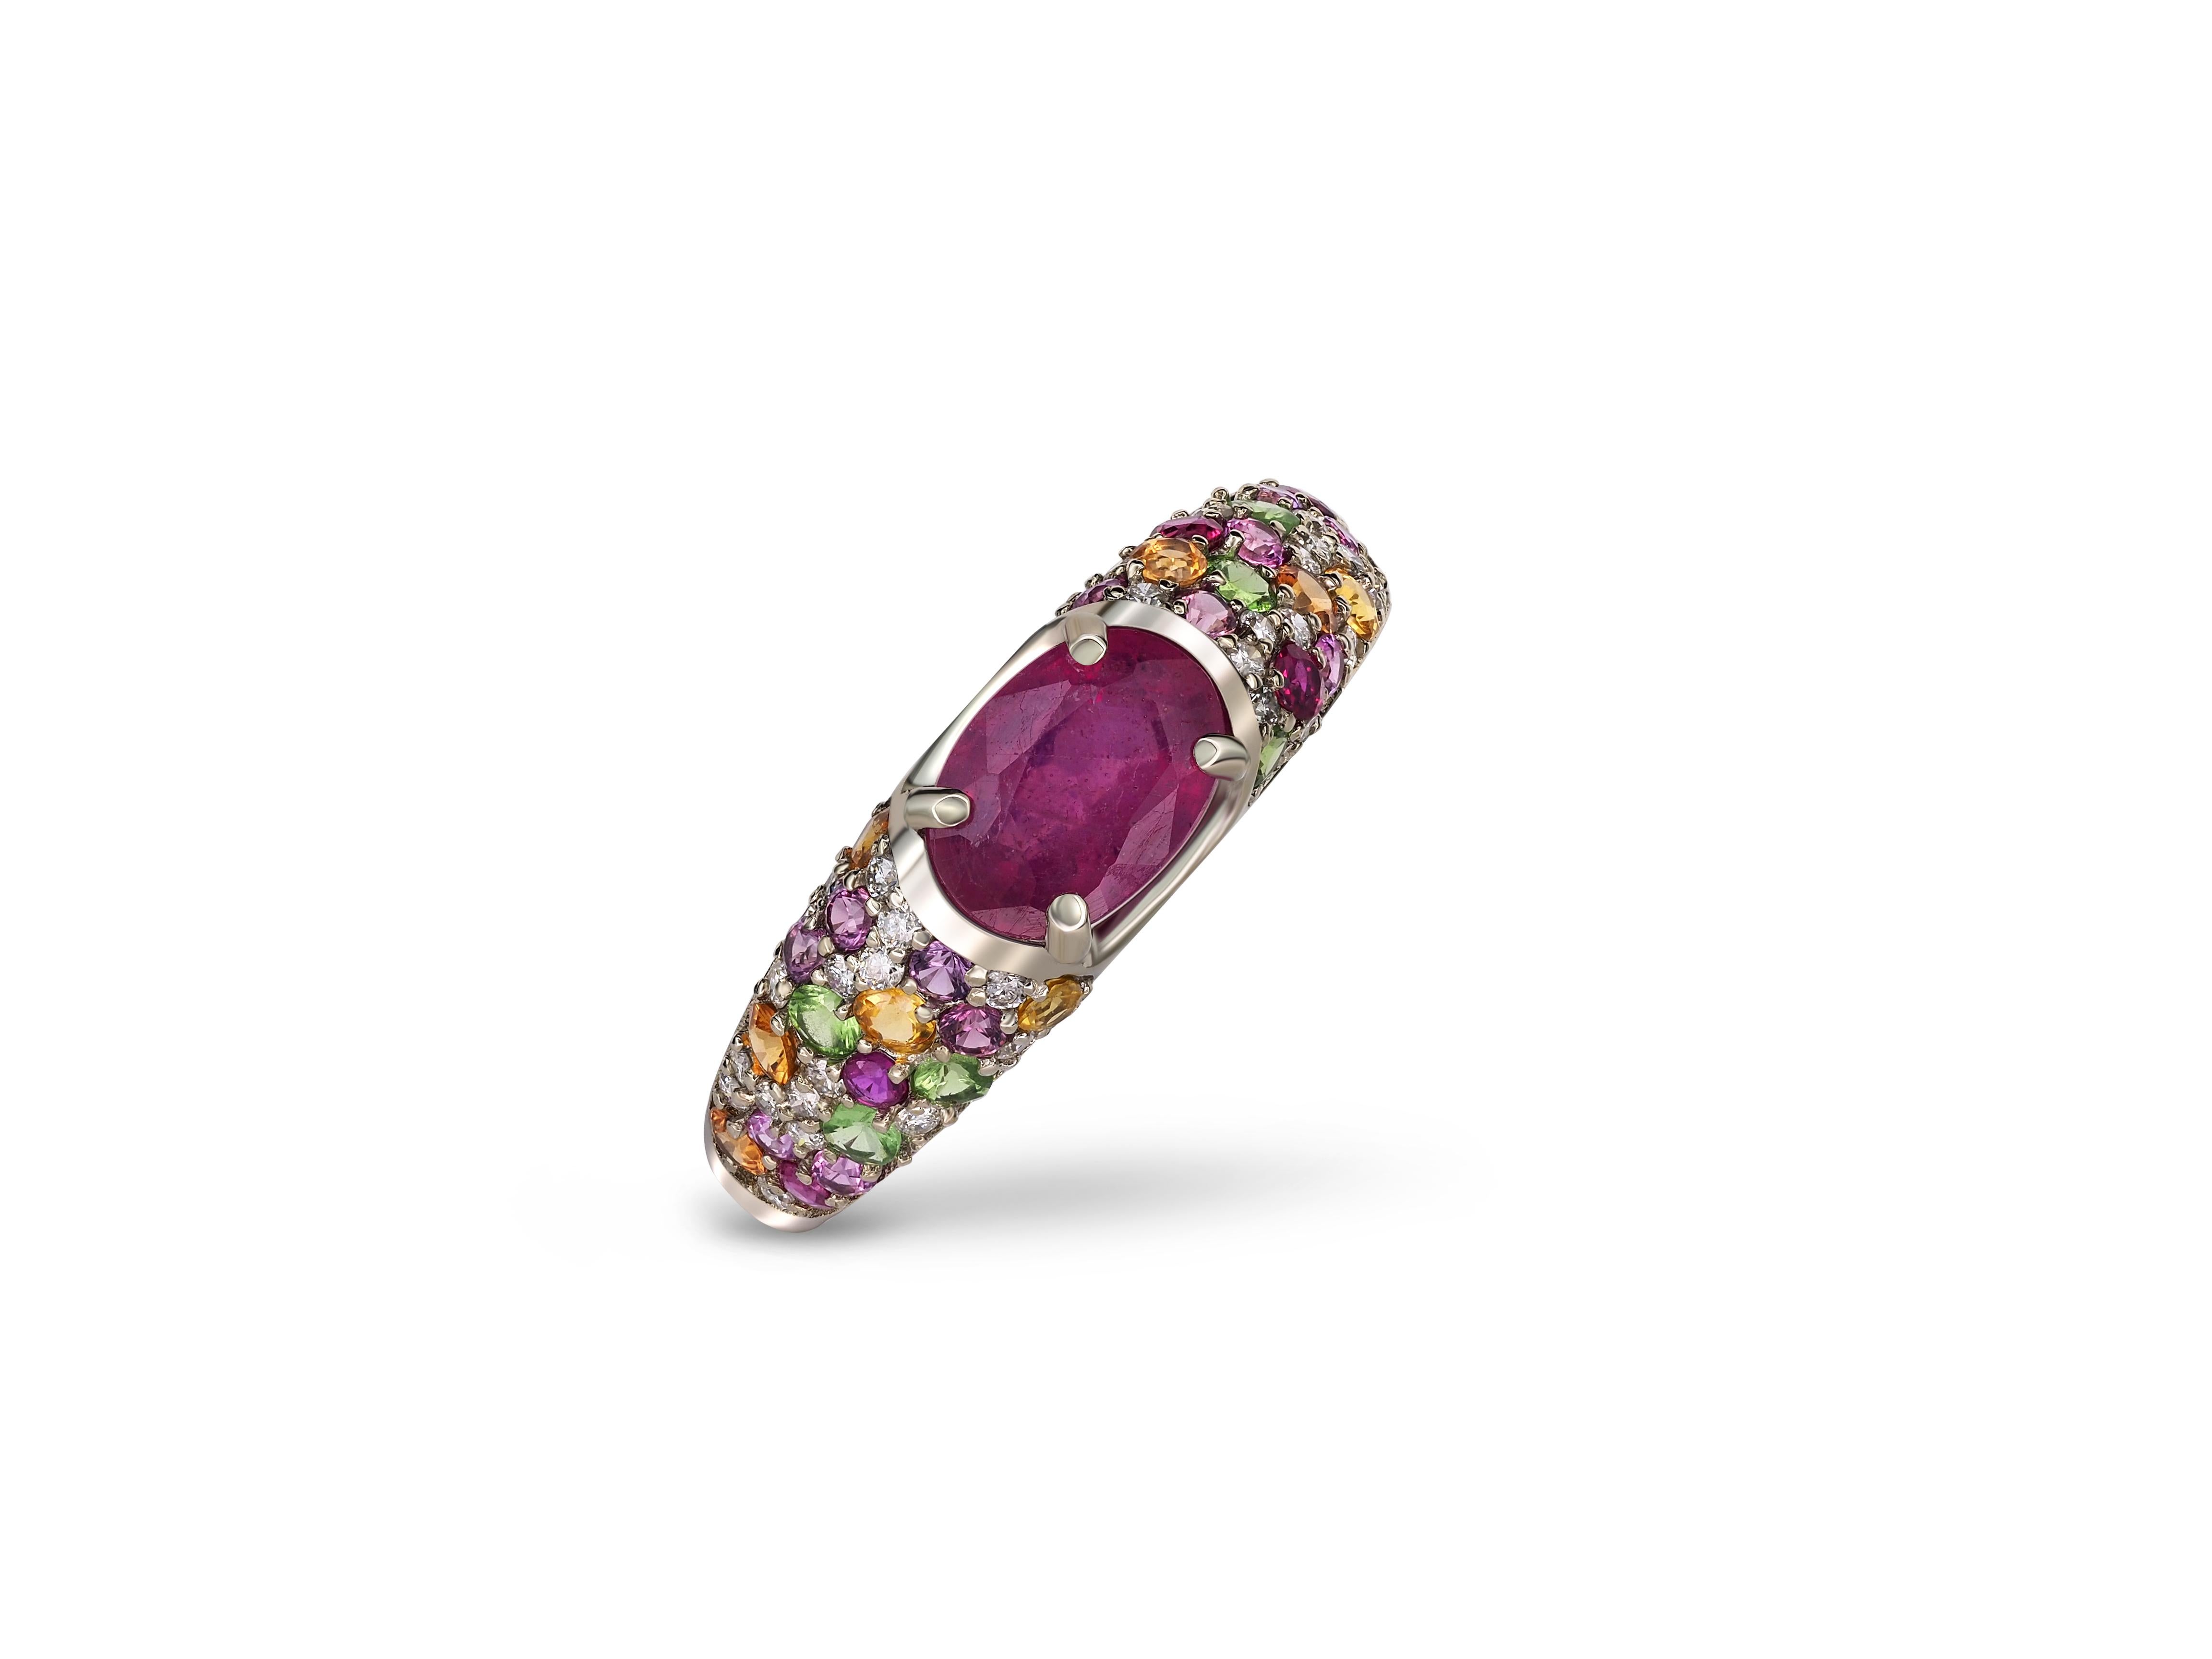 For Sale:  14k gold ruby and multicolored gemstones ring. 8